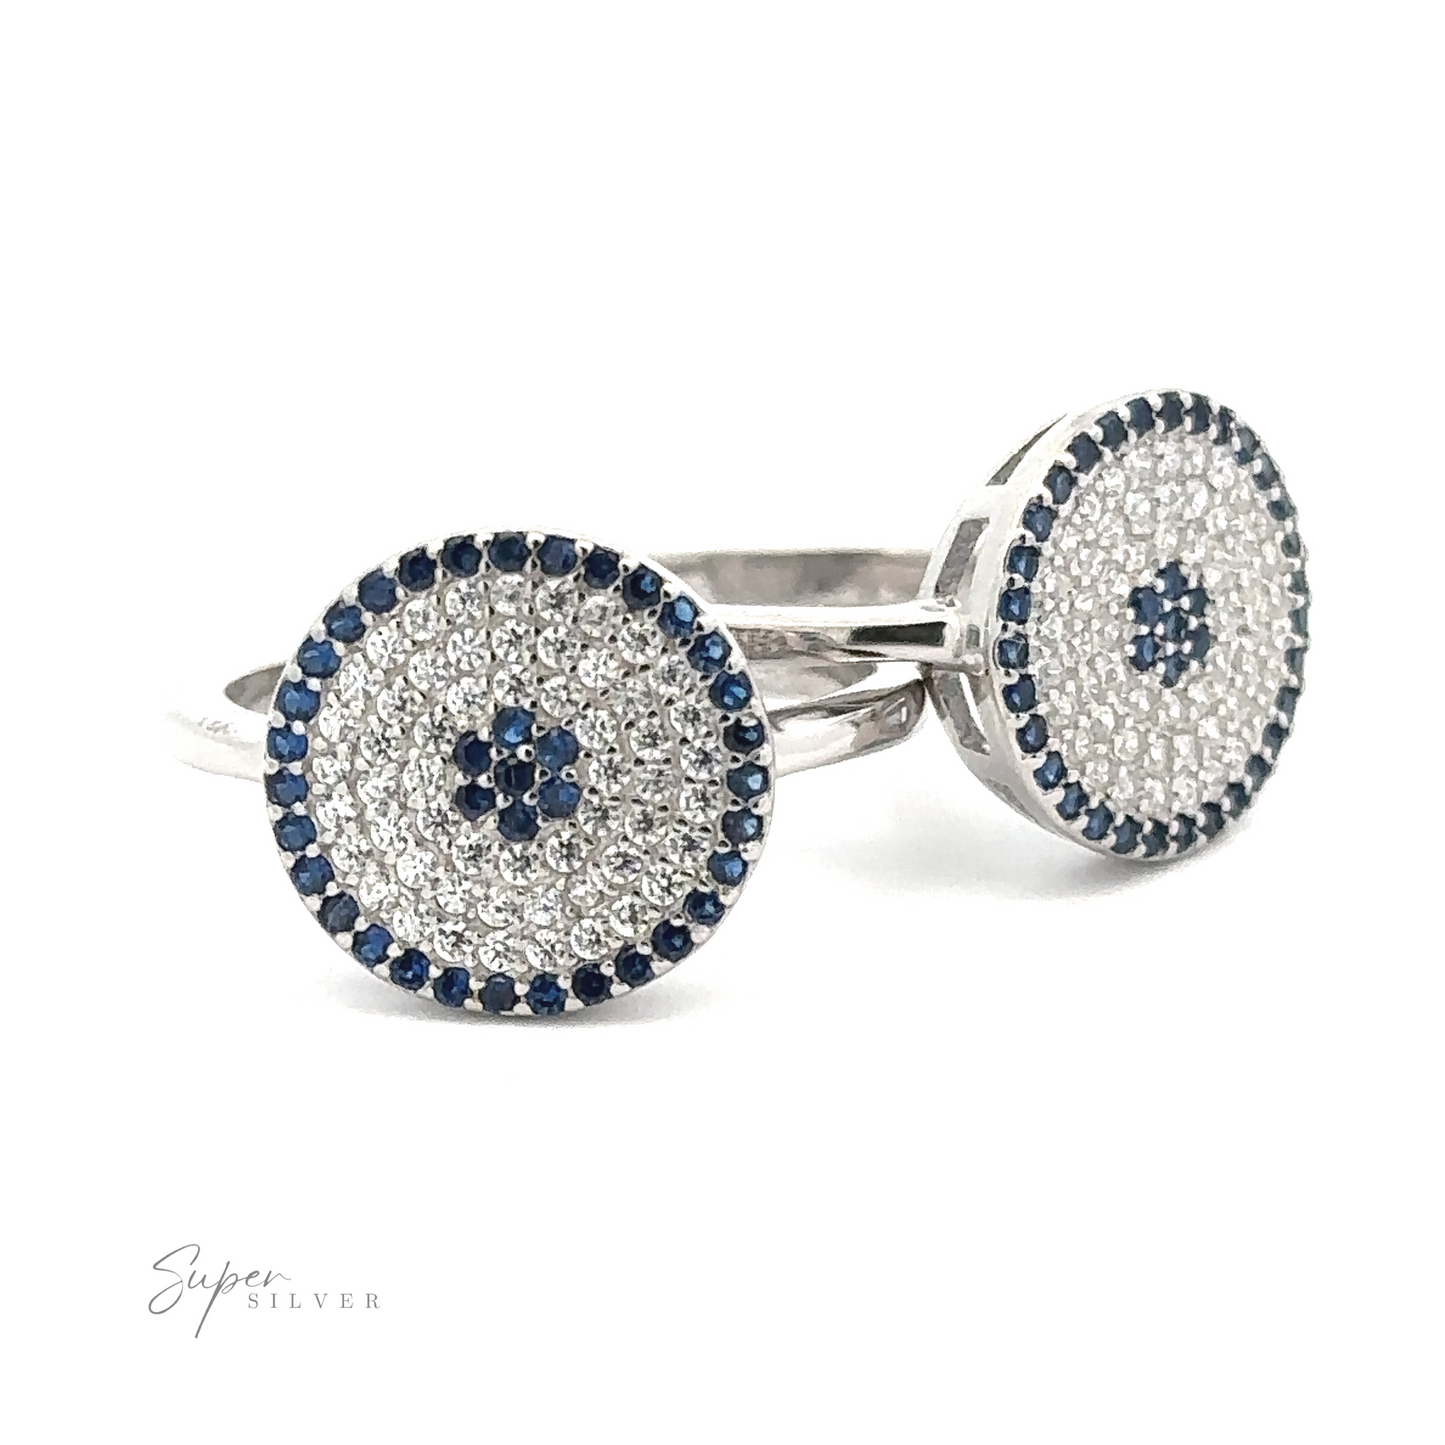 A pair of sterling silver rings featuring circular blue and white gemstone designs, reminiscent of a Cubic Zirconia Evil Eye Ring.